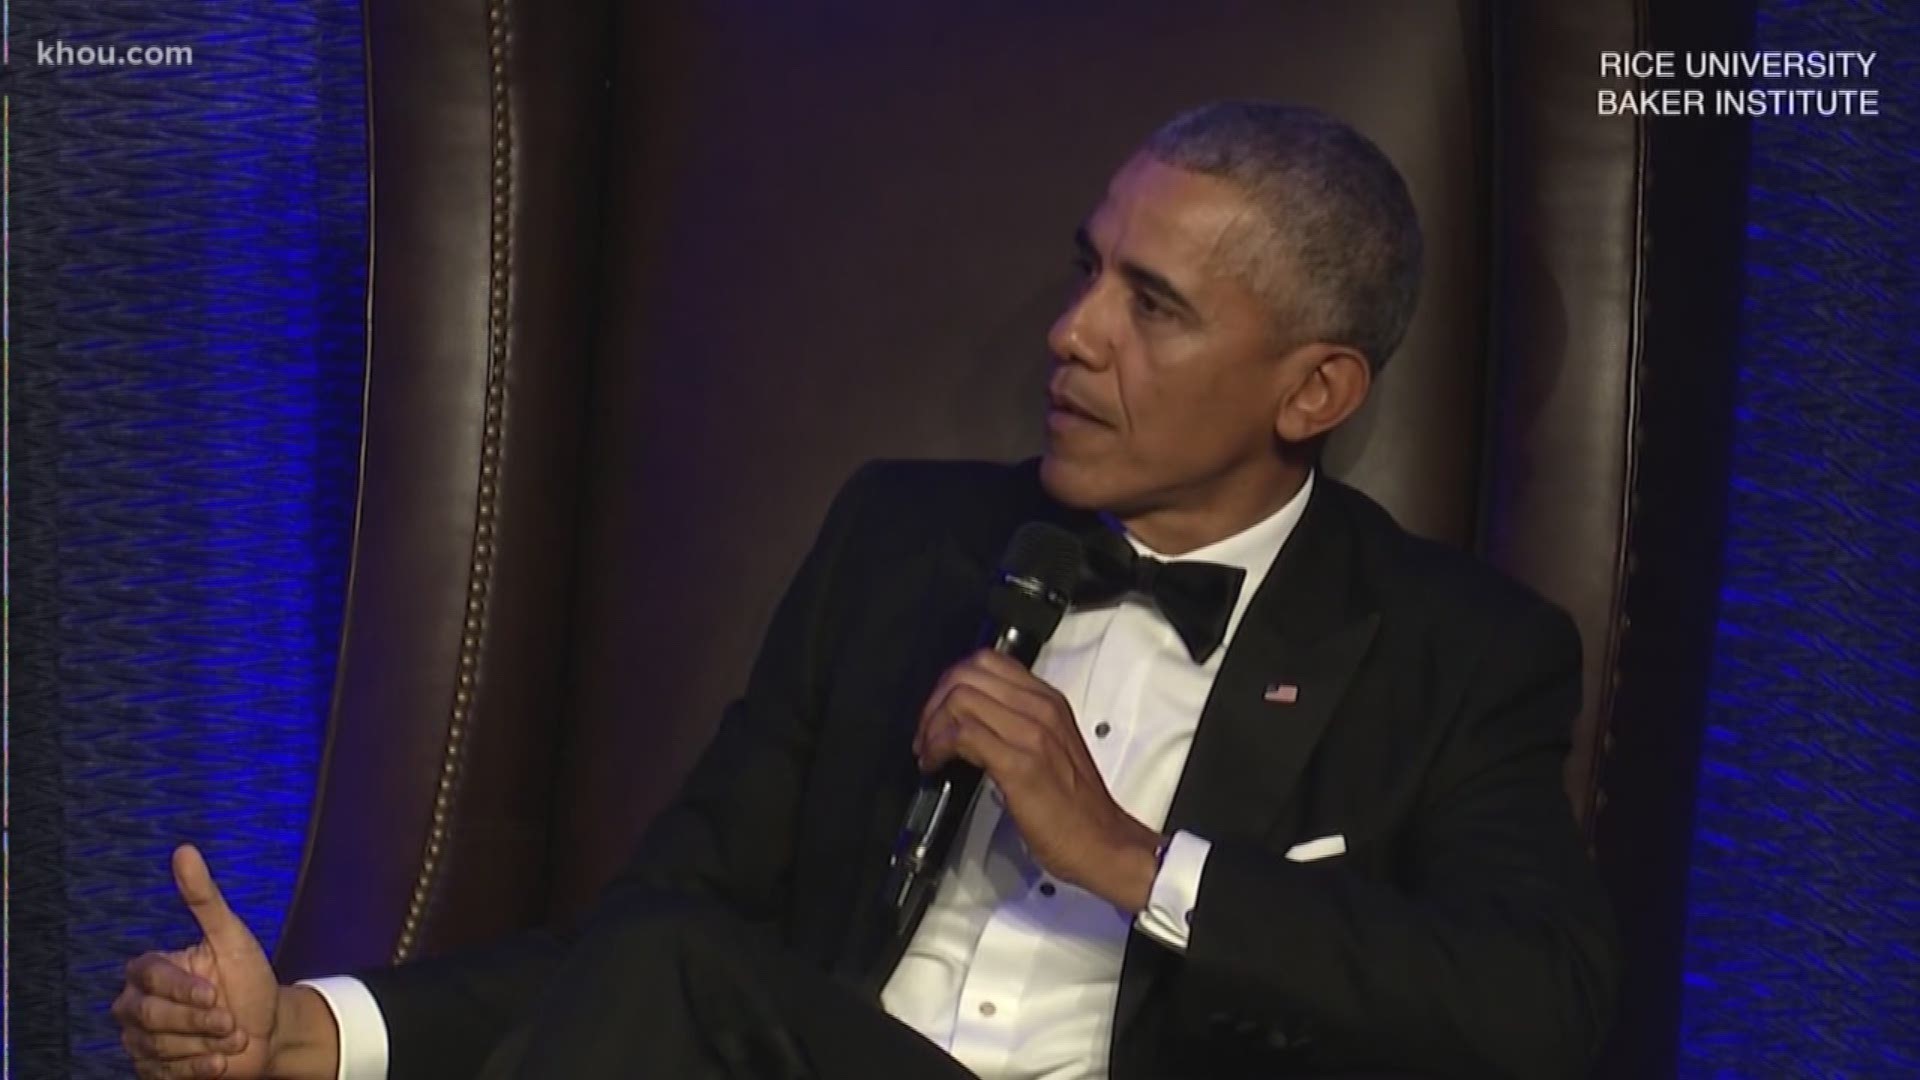 Former President Barack Obama was in Houston Tuesday night celebrating a milestone at Rice University. He was the special guest at the Baker Institute gala.